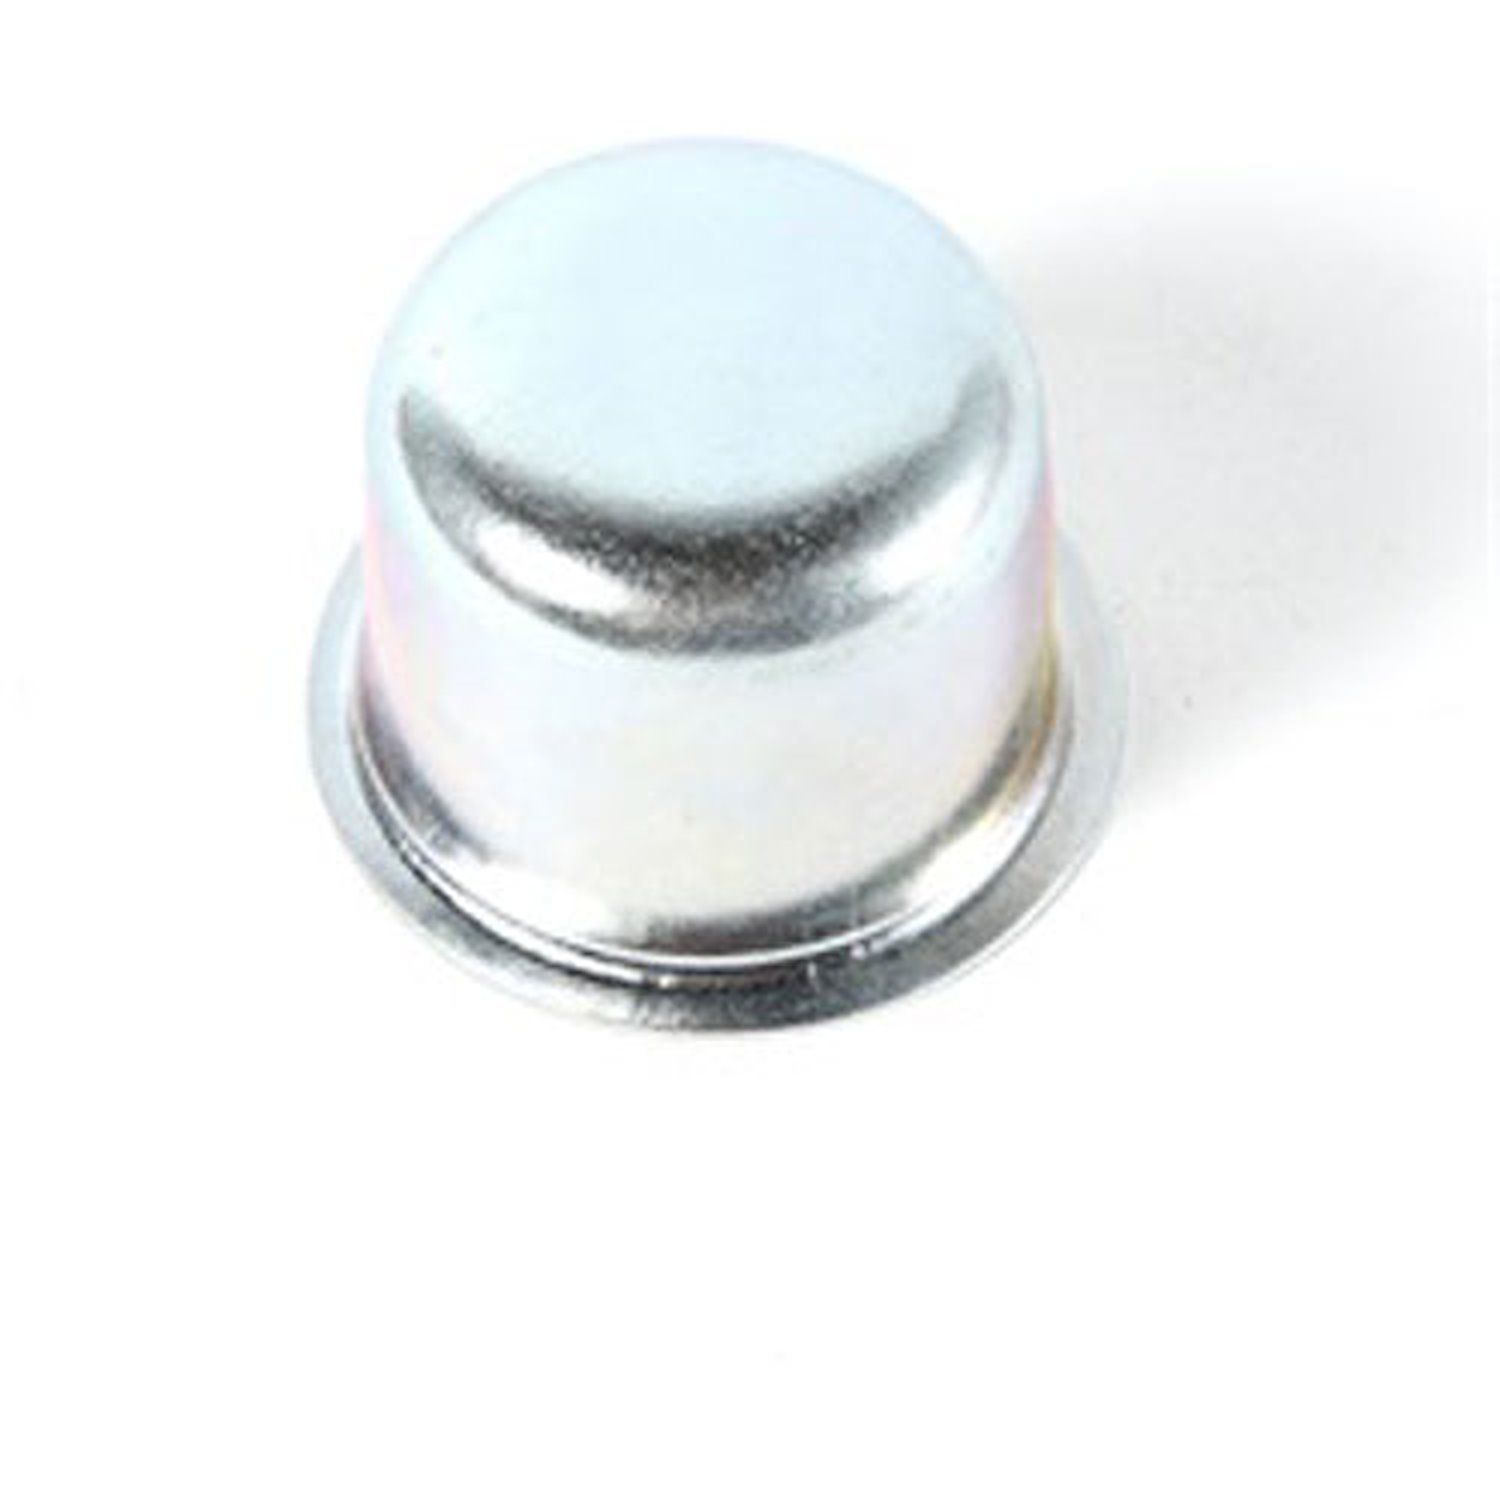 This zinc-plated wheel hub bearing dust cap from